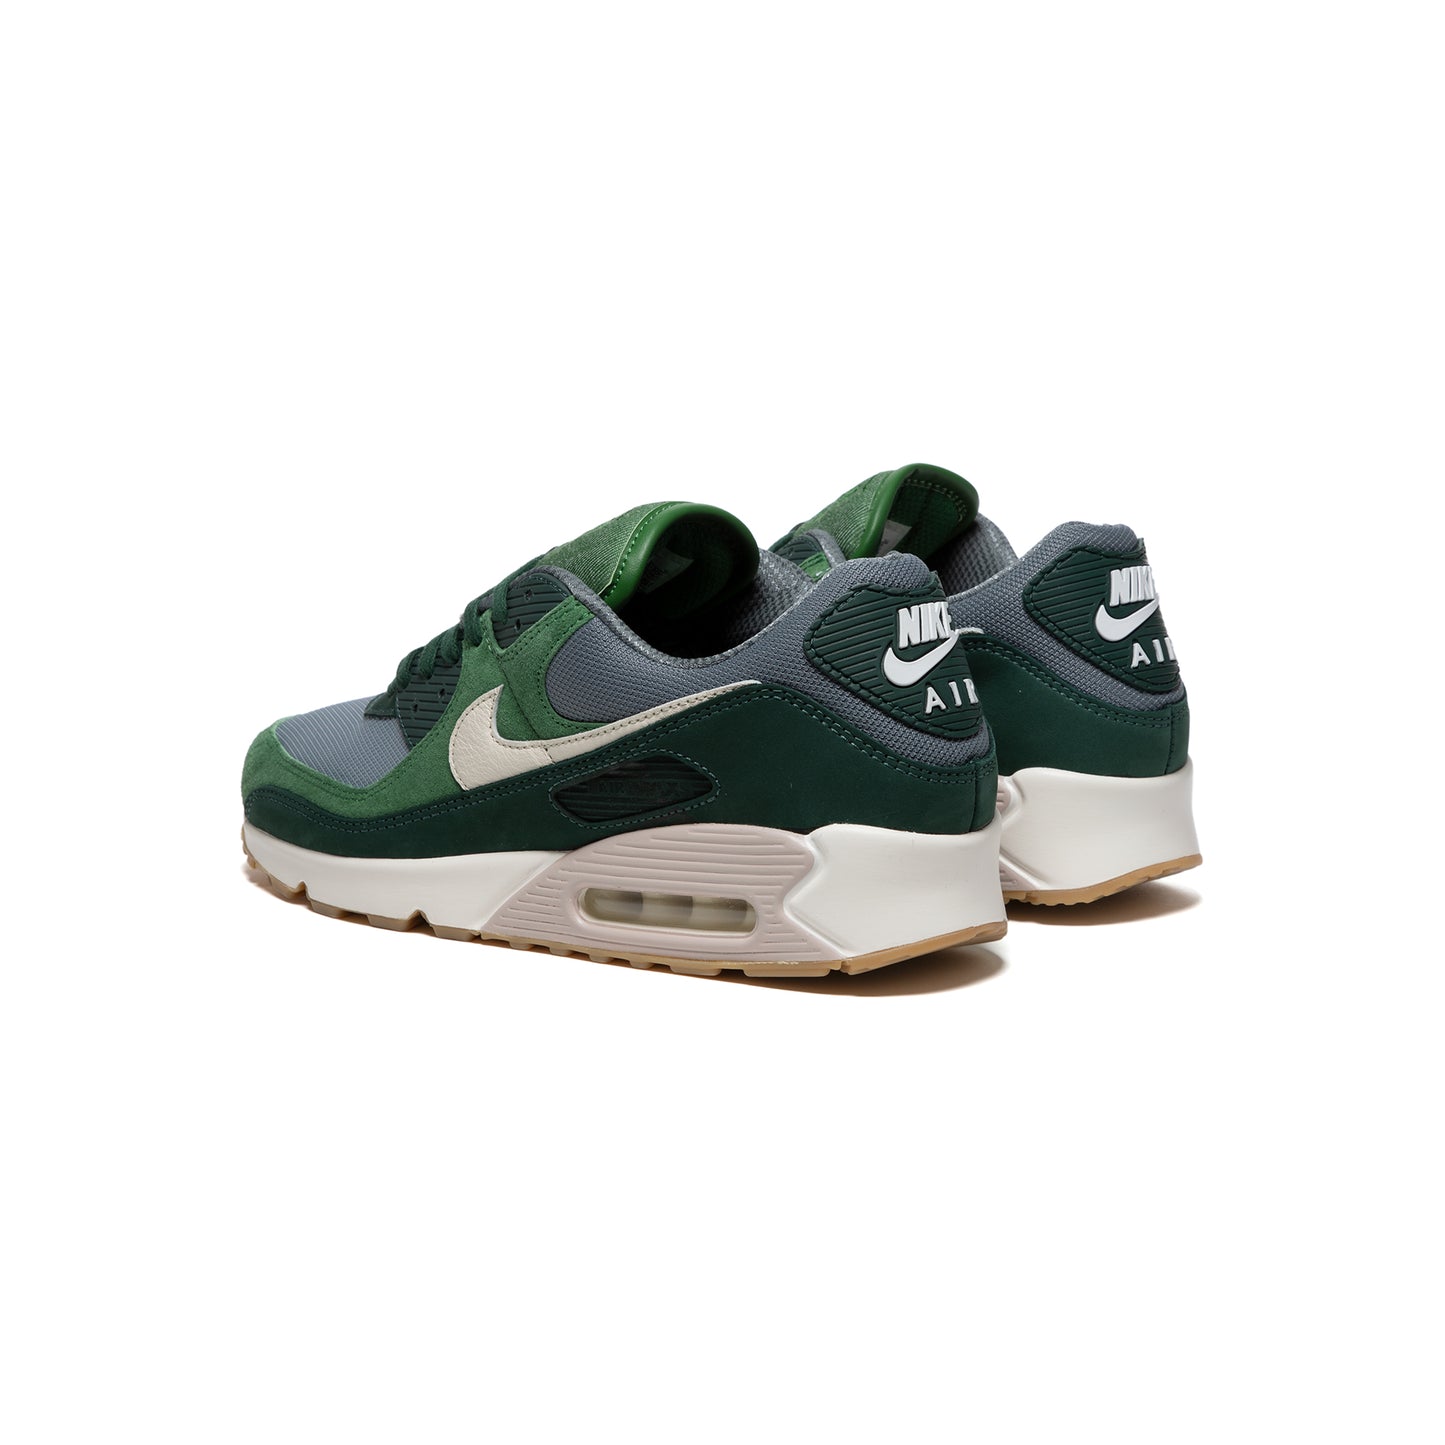 Nike Air Max 90 PRM (Pro Green/Pale Ivory/Forest Green)